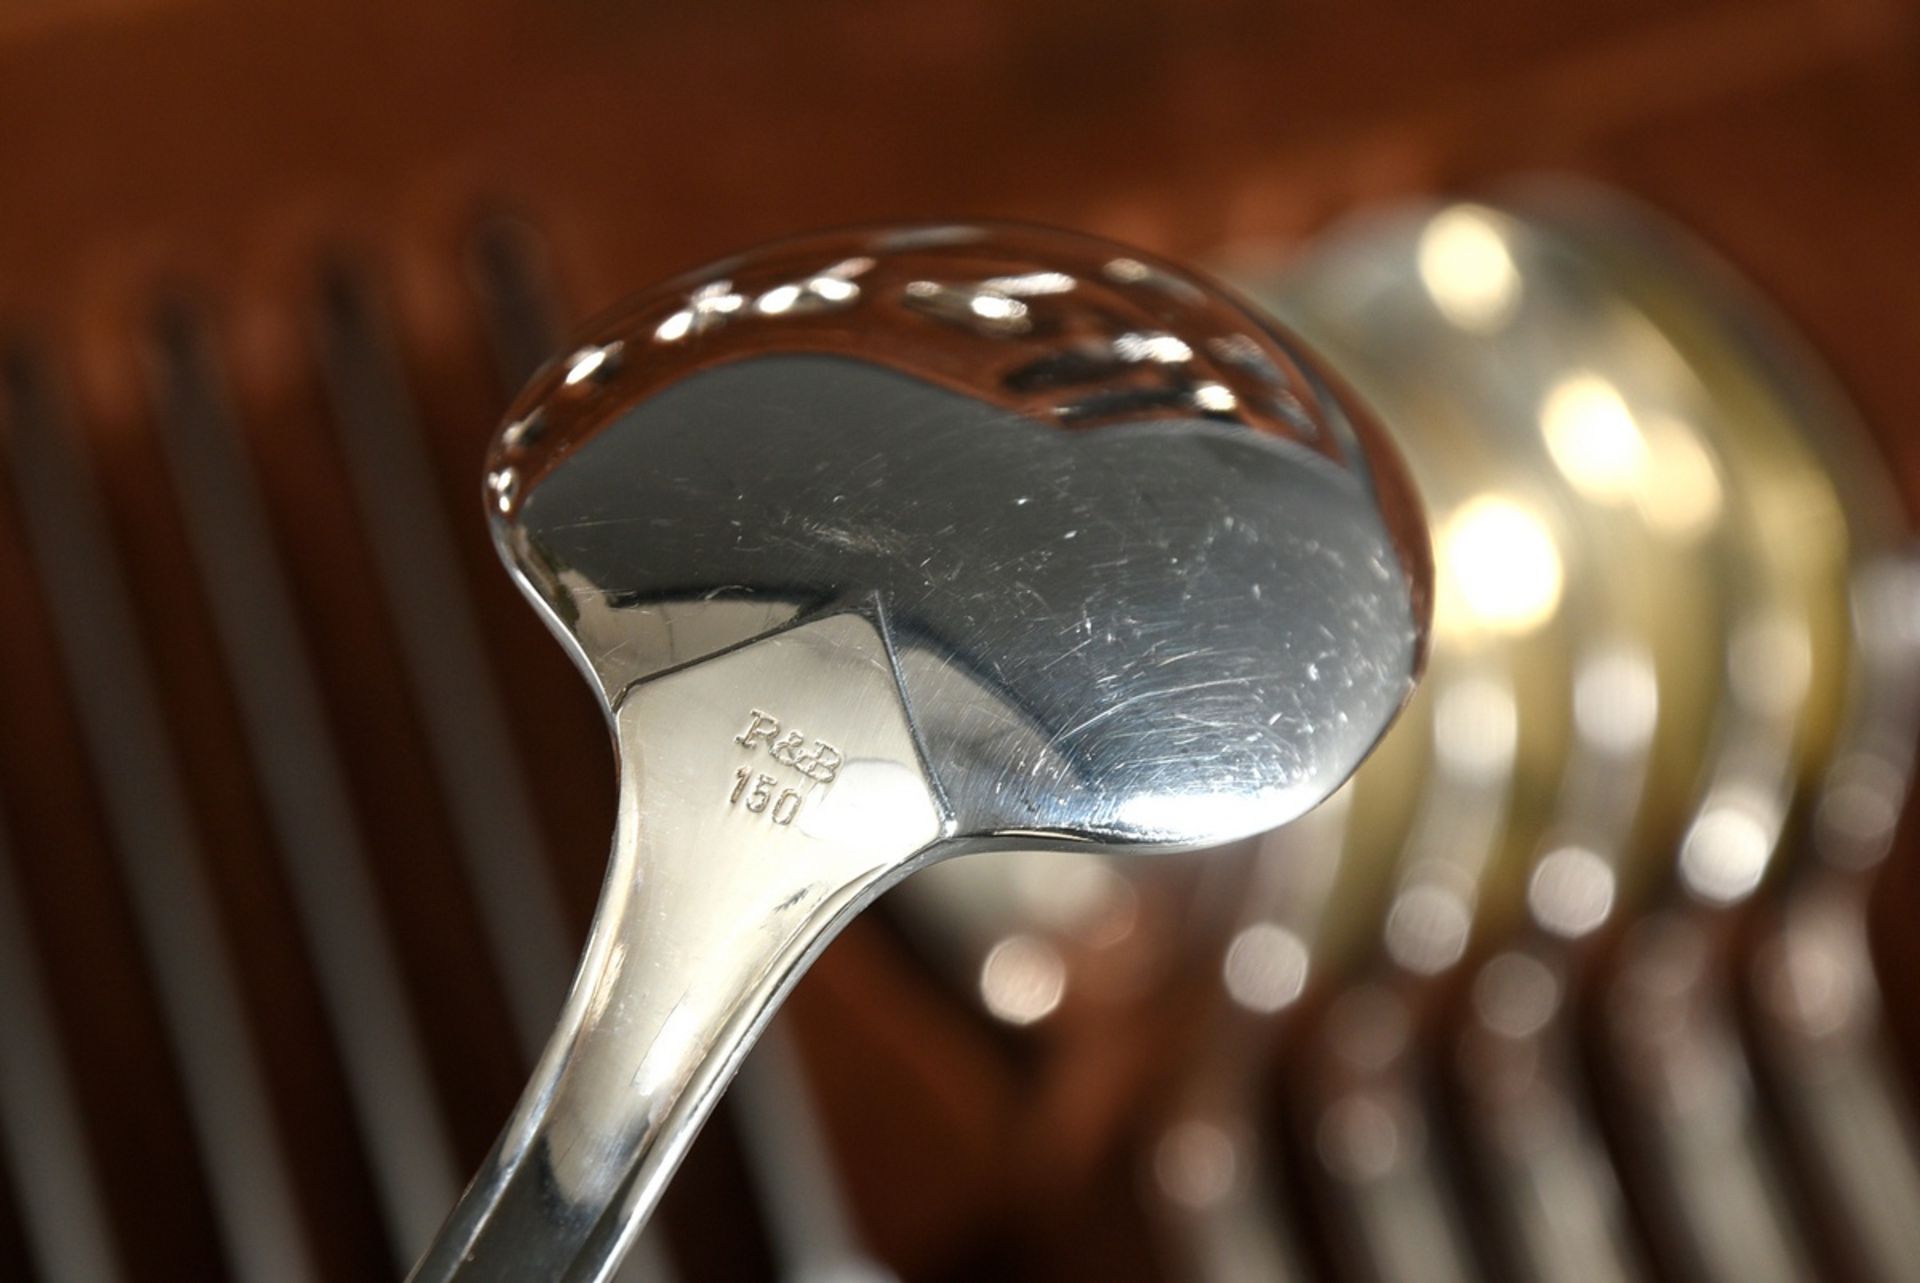 38 Pieces silverplated Robbe & Berking cutlery "Glücksburger Faden" with flower-shaped handle for 6 - Image 4 of 5